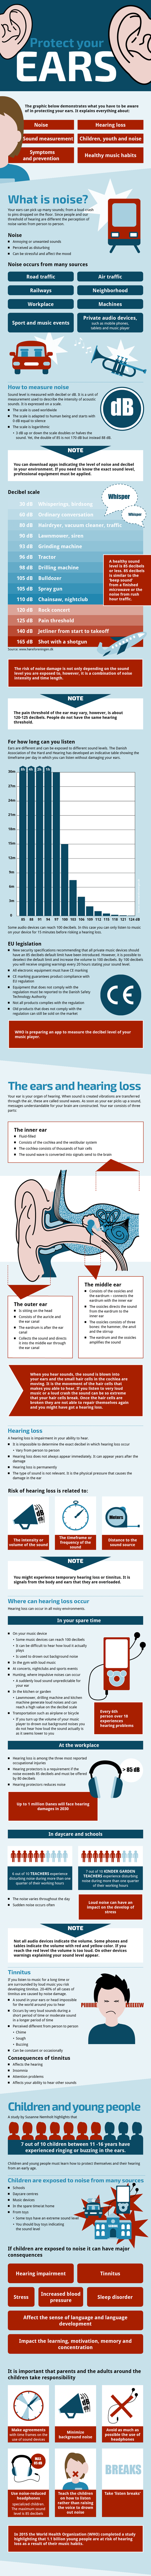 Protect Your Ears Infographic